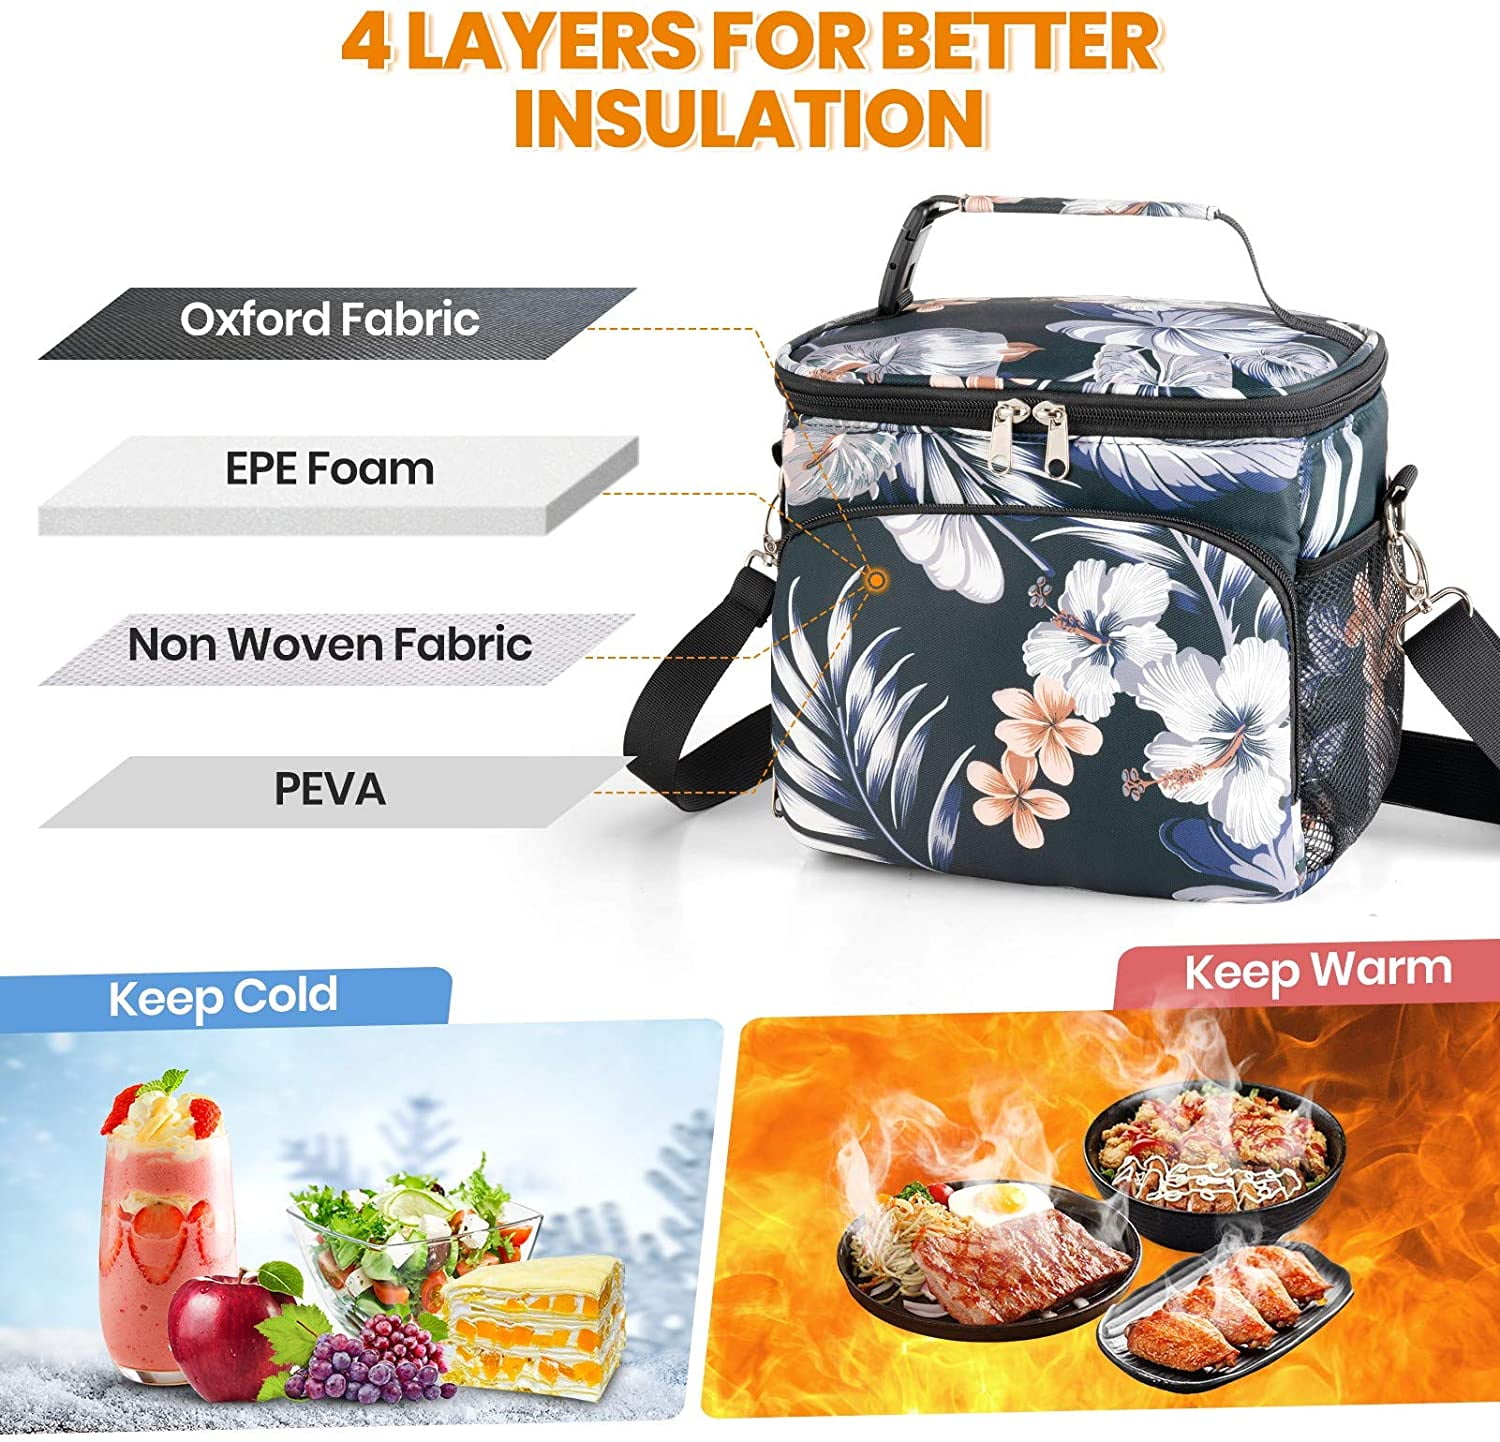  FITHOME Insulated Lunch Bag for Women/Men, Reusable Leakproof  Cooler Thermal Lunch Box Tote Bags fit for Ice Pack, Adults College Fashion  Lunch Bags for Work/Picnic/Travel: Home & Kitchen